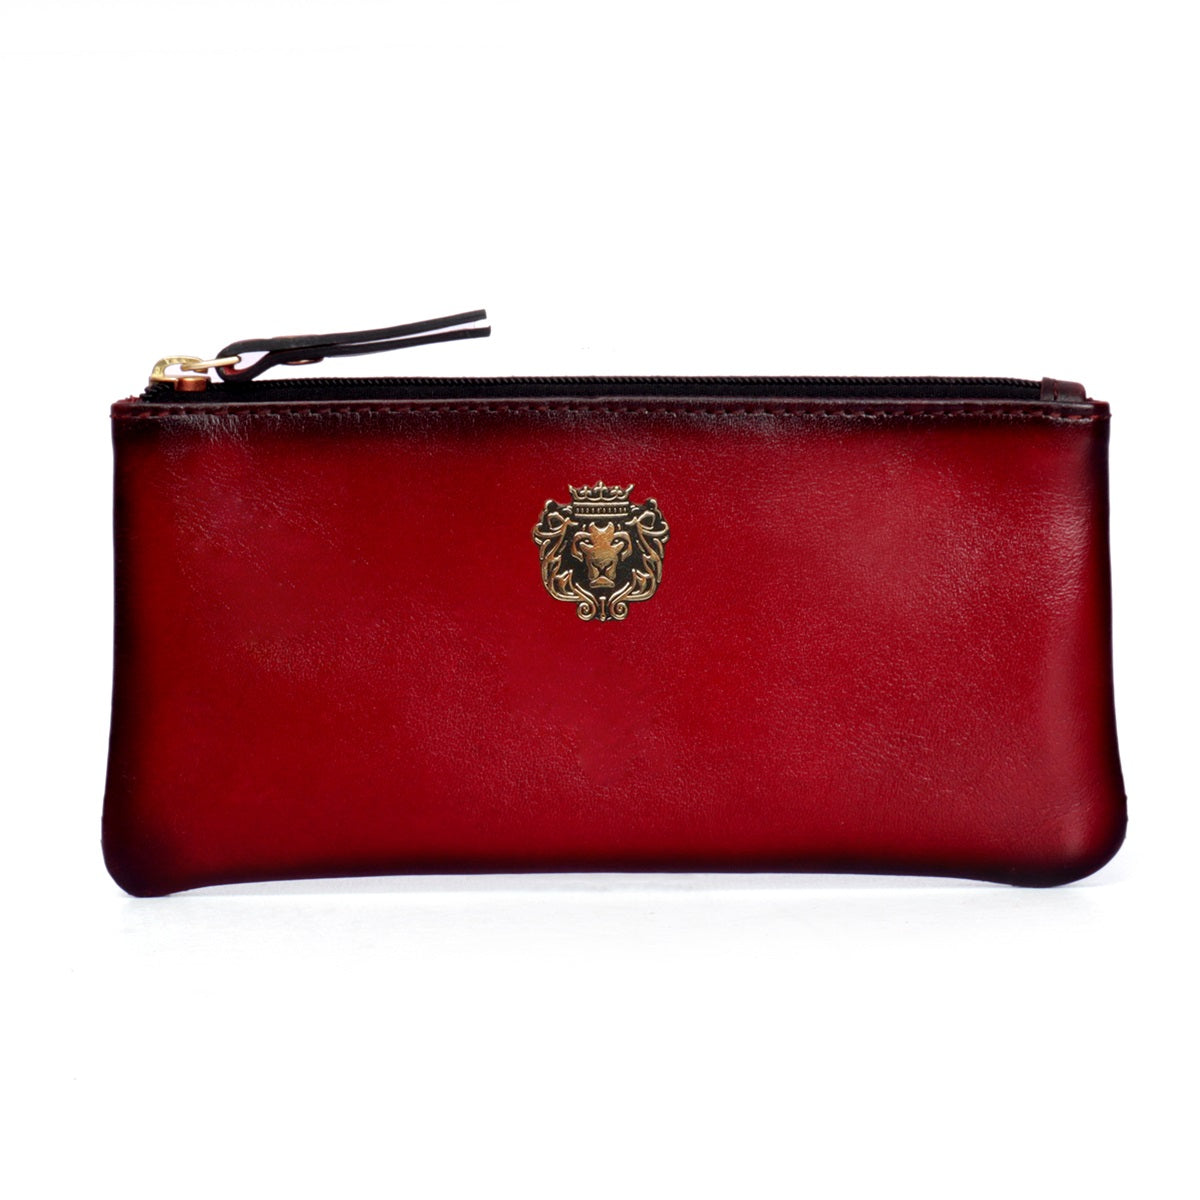 Unisex Wine Plain Genuine Leather Pouch With Metal Lion Logo By Brune